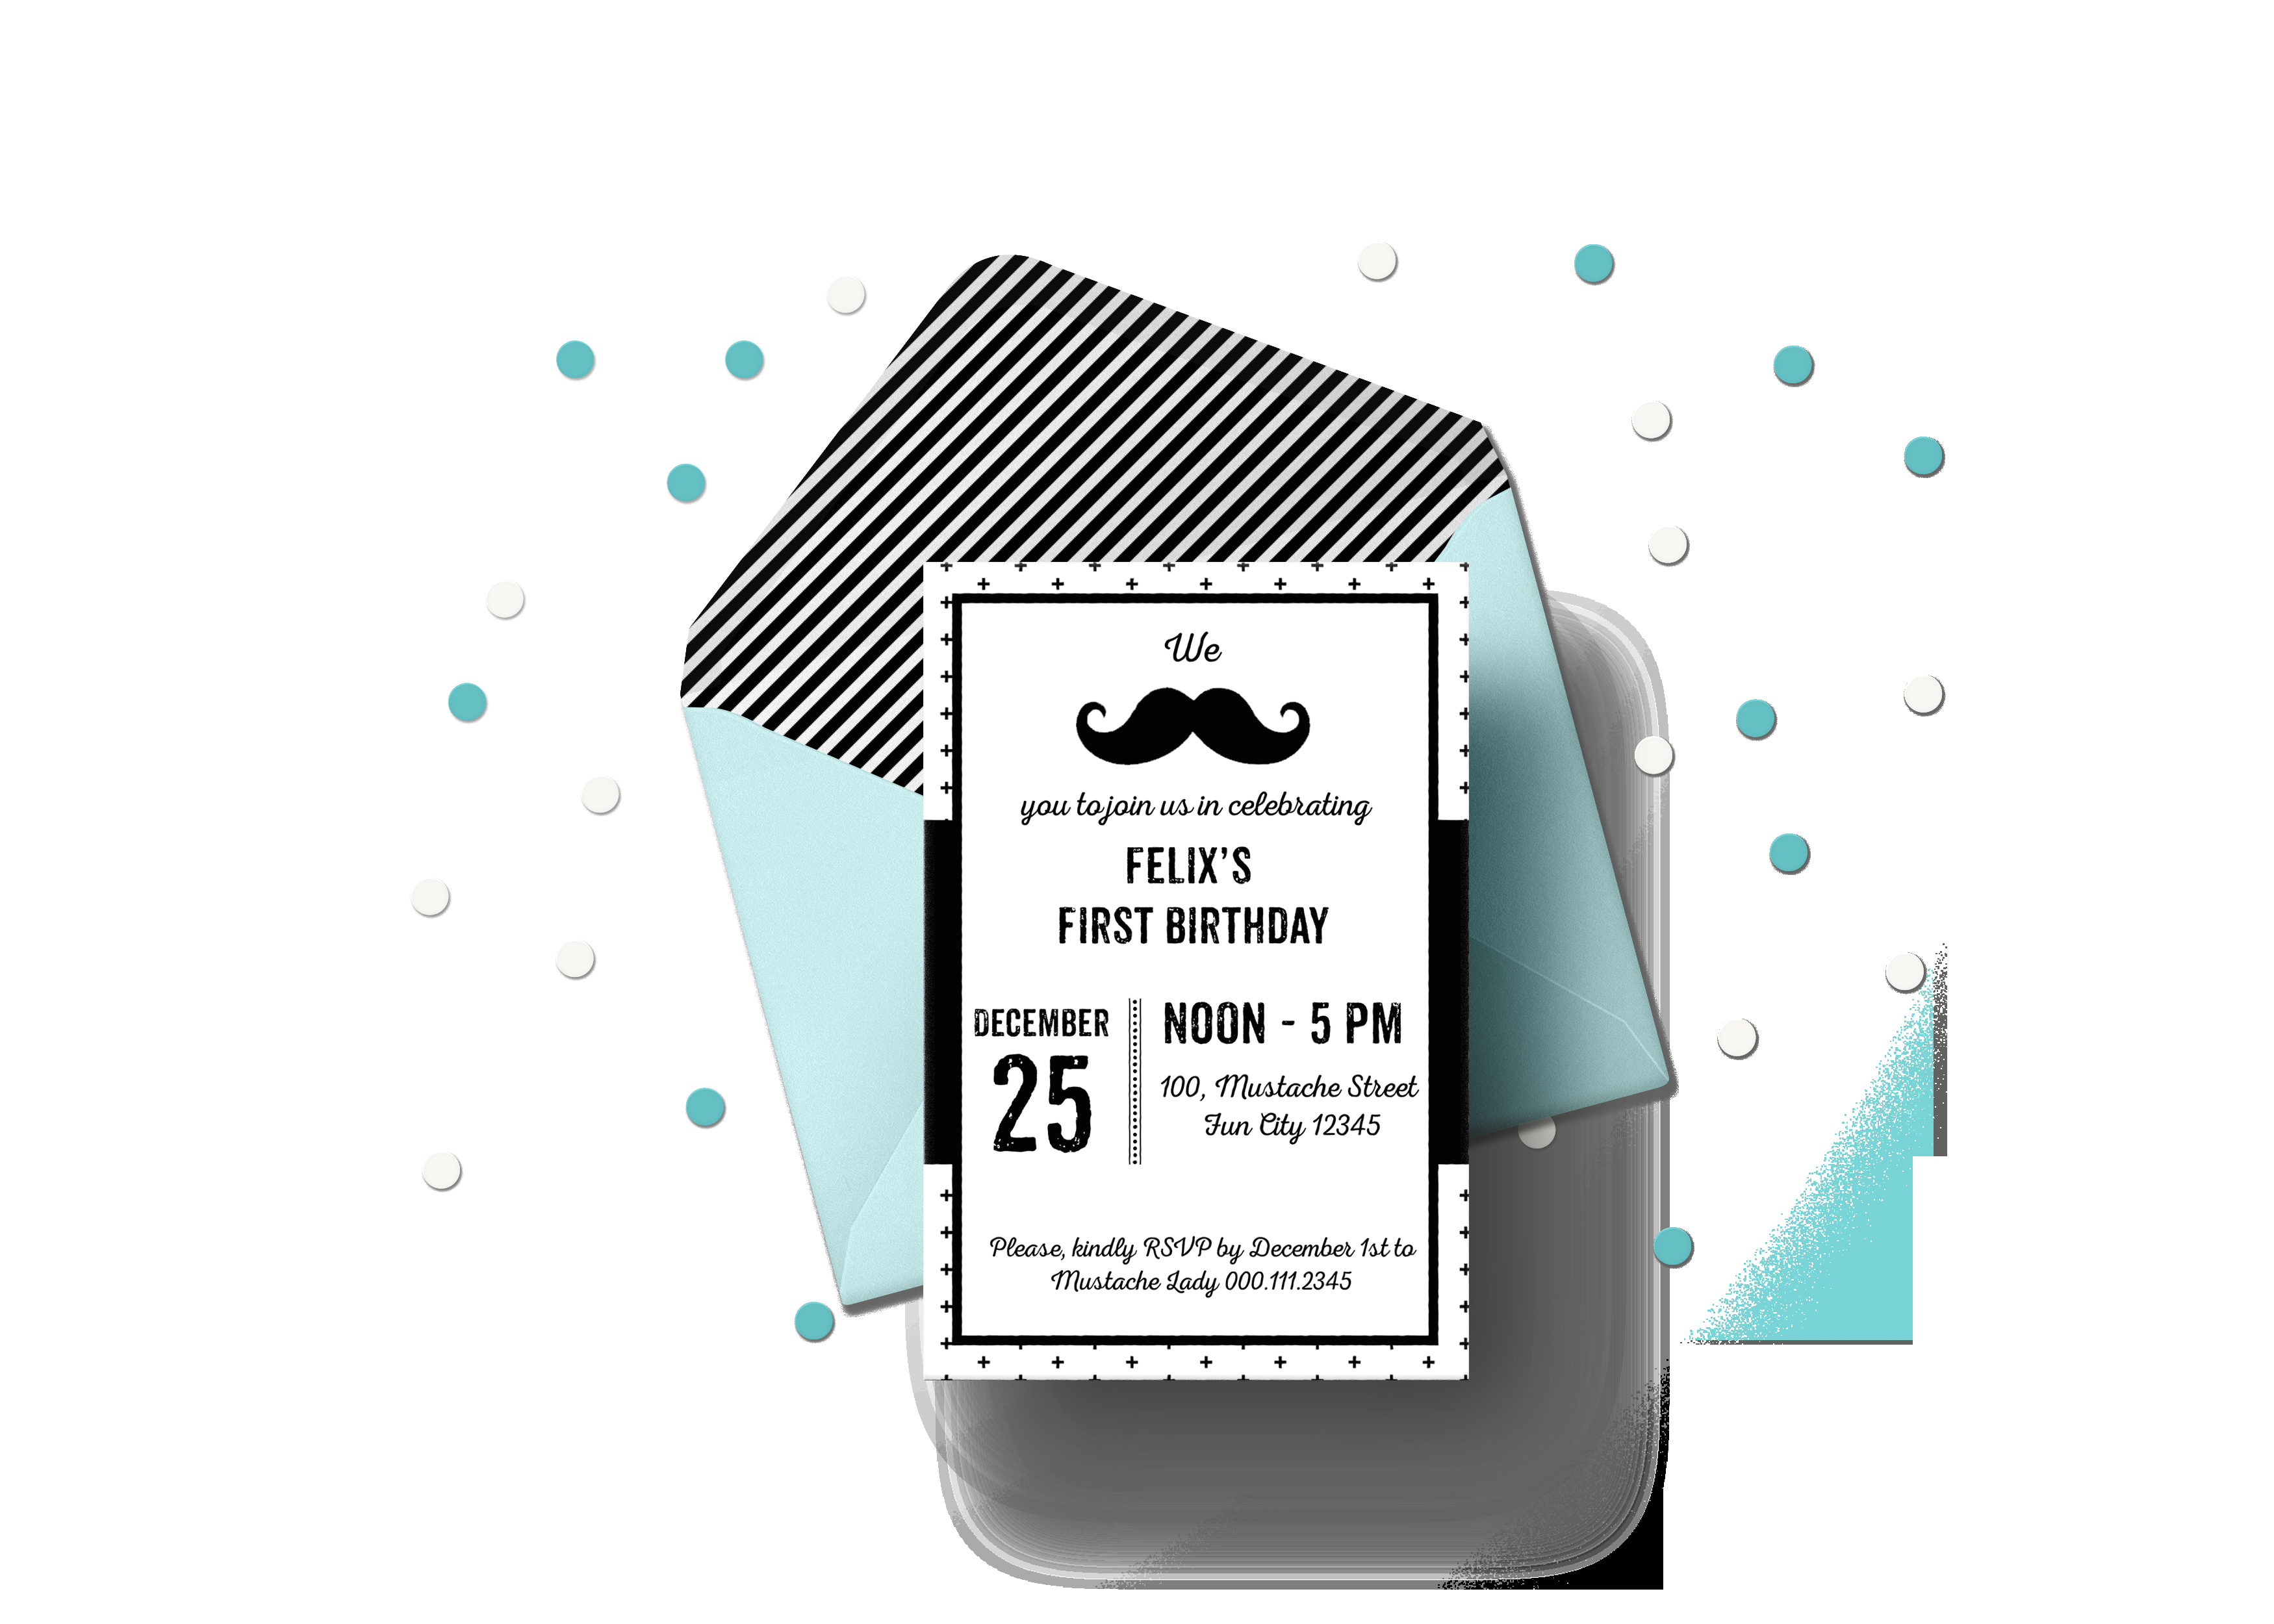 mustache-birthday-party-invitations-templates-business-template-ideas